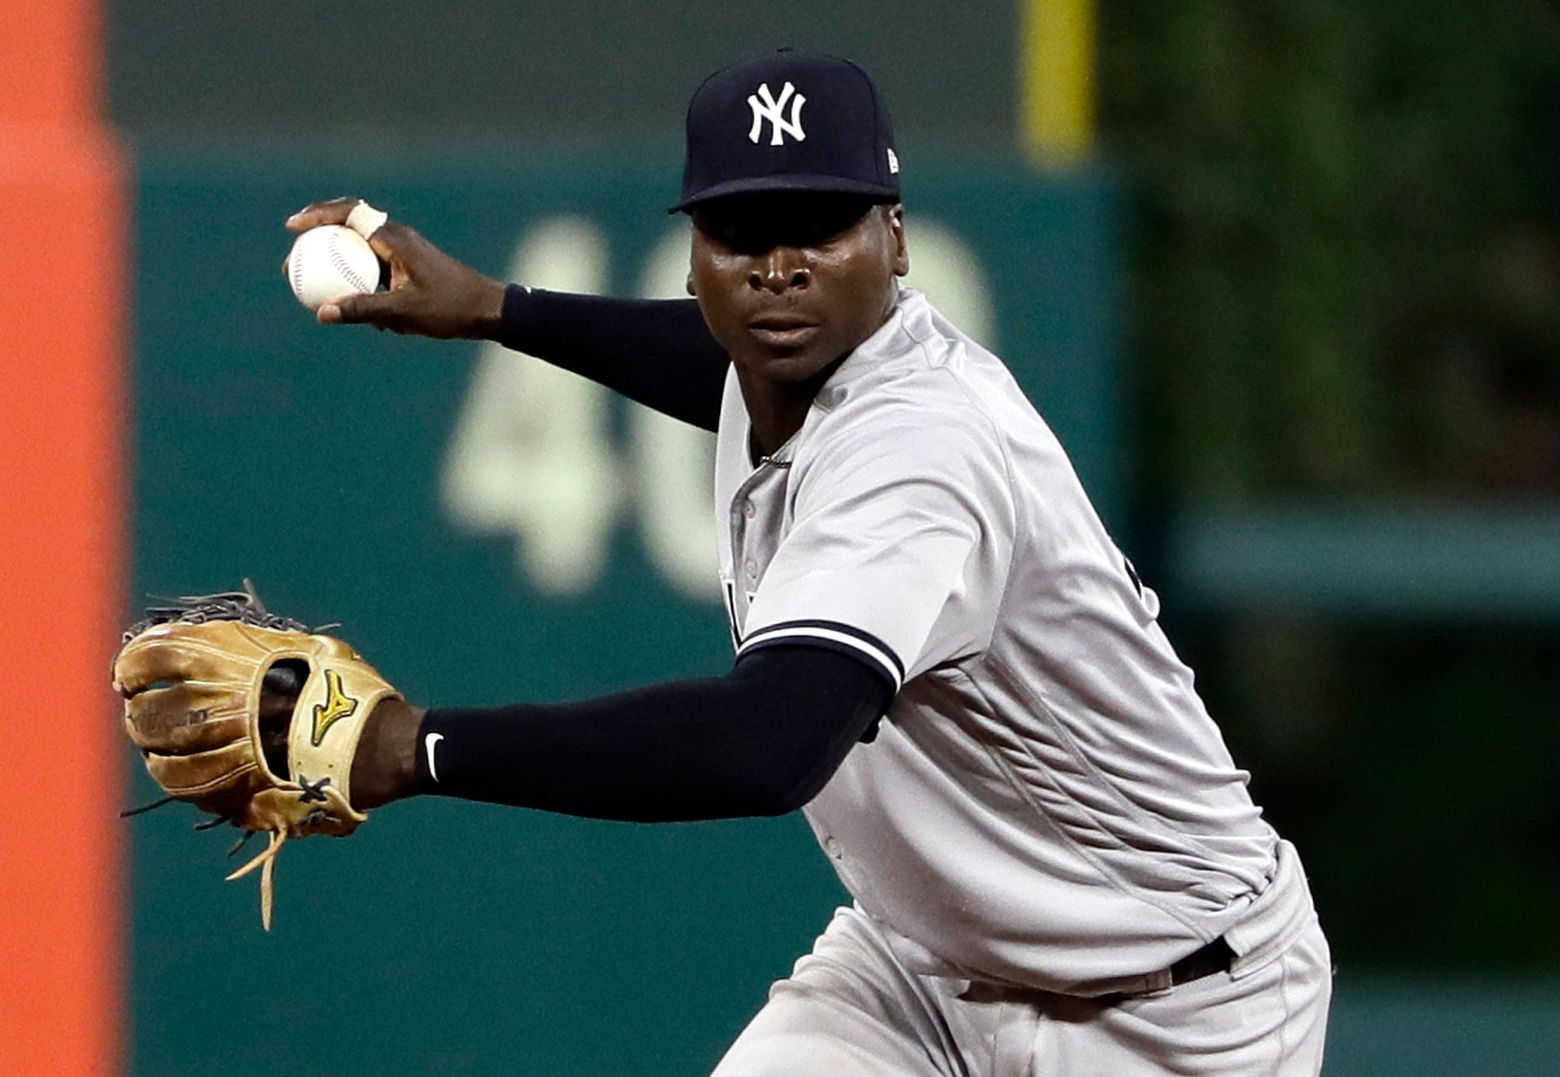 Didi Gregorius of Yankees Is Expected to Miss First Month of the Season -  The New York Times